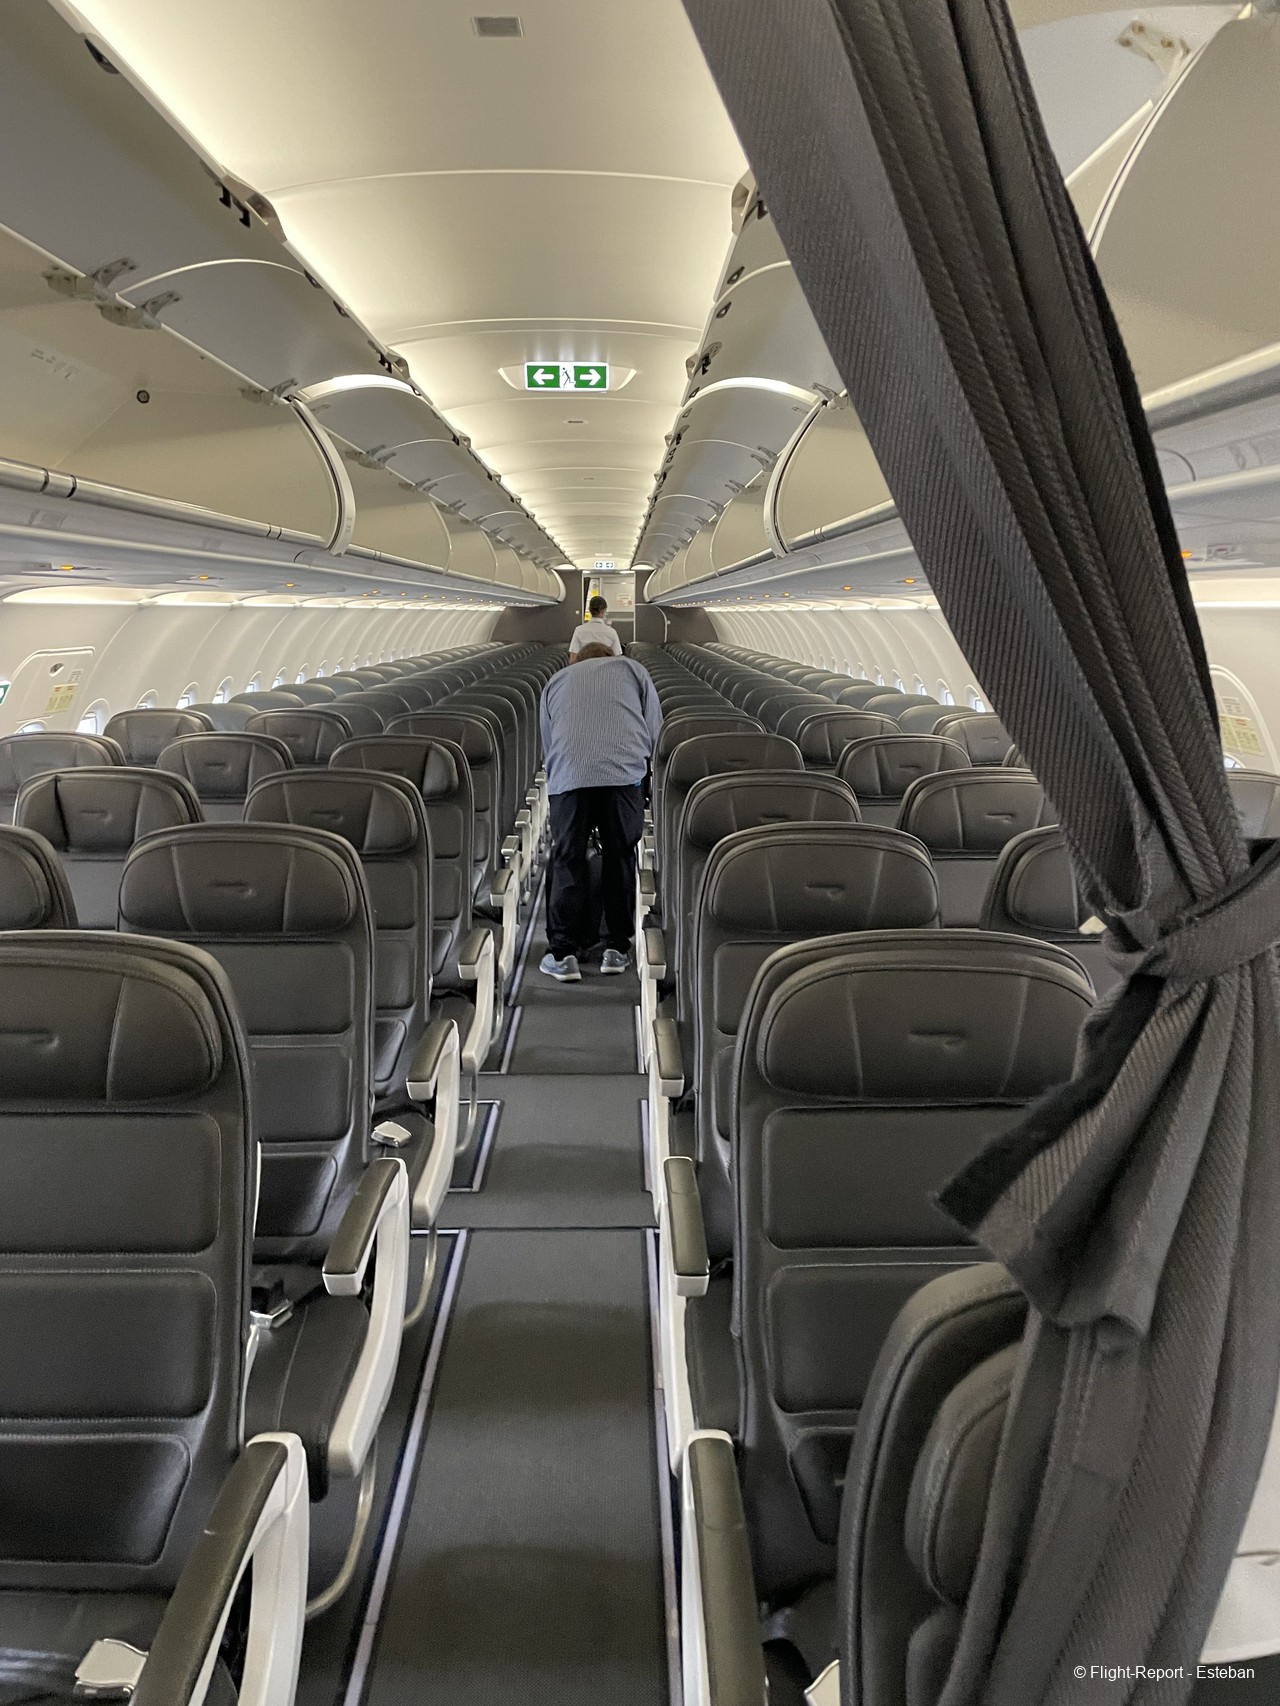 Review of British Airways flight from Amman to London in Business